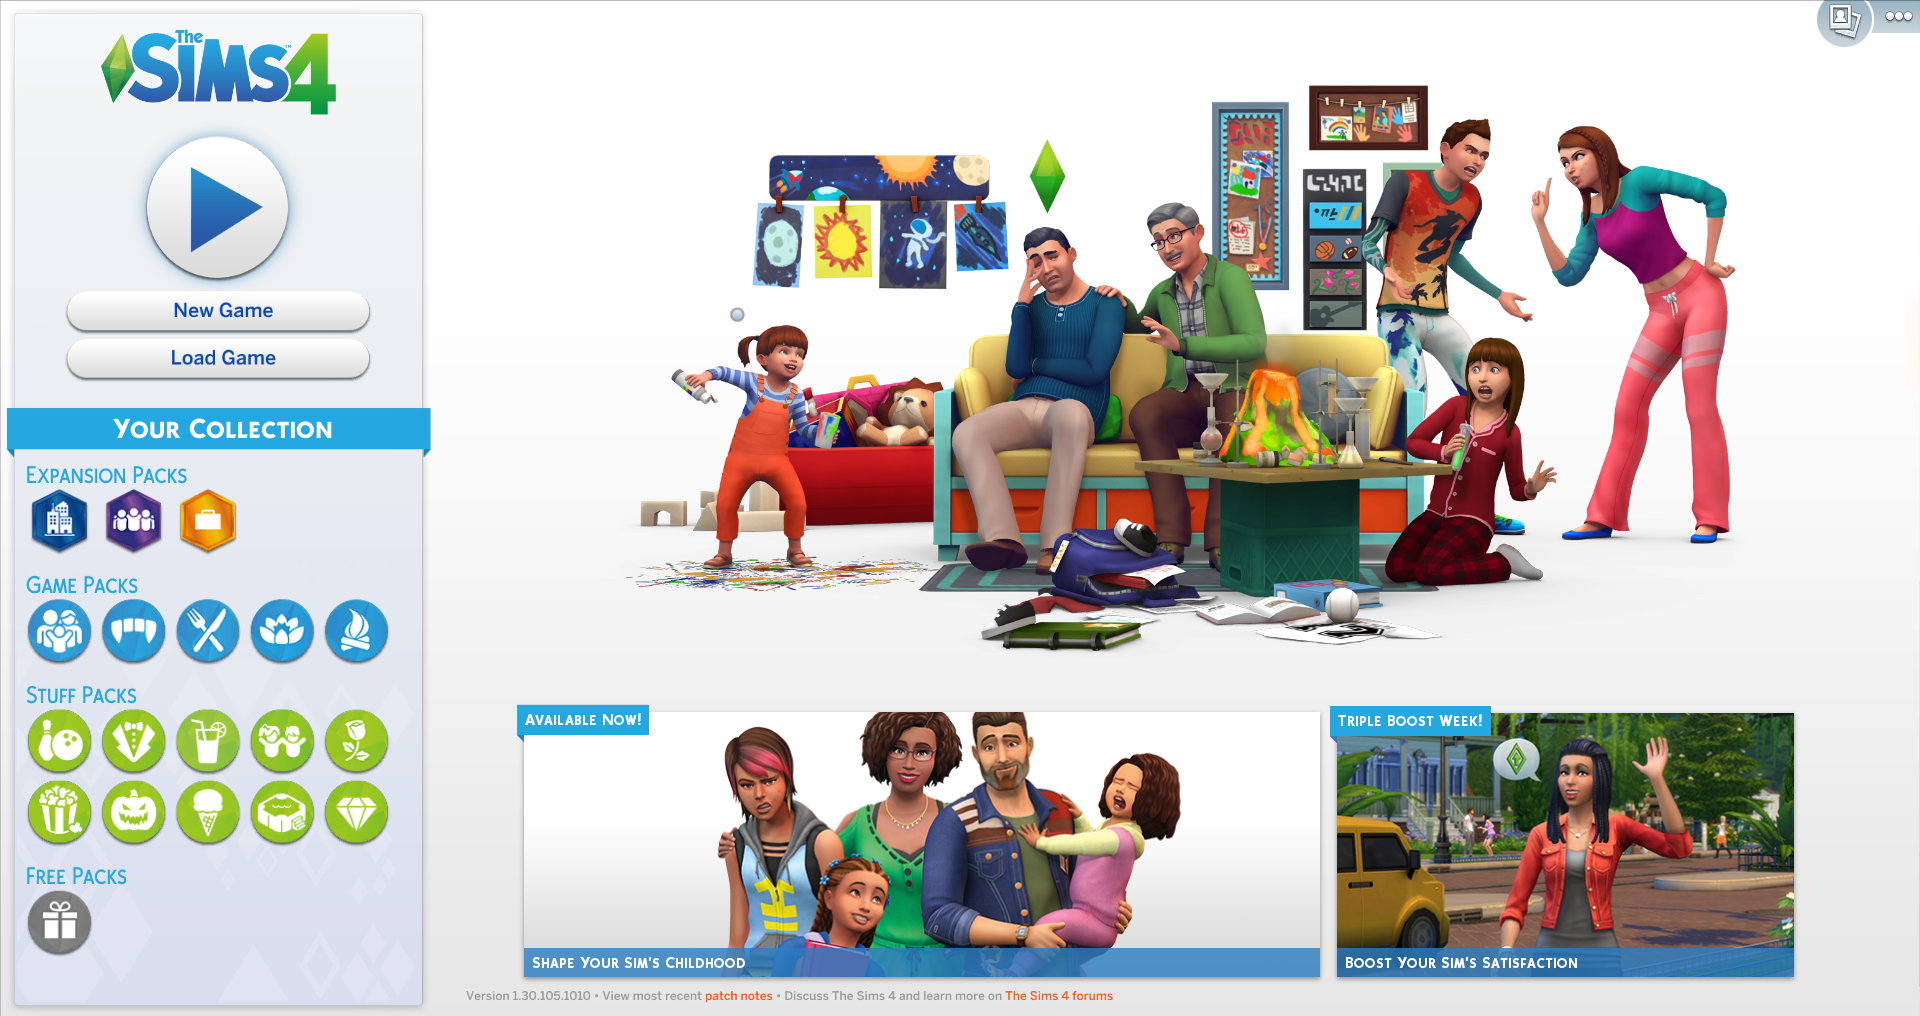 the sims 4 keys free expansion packs